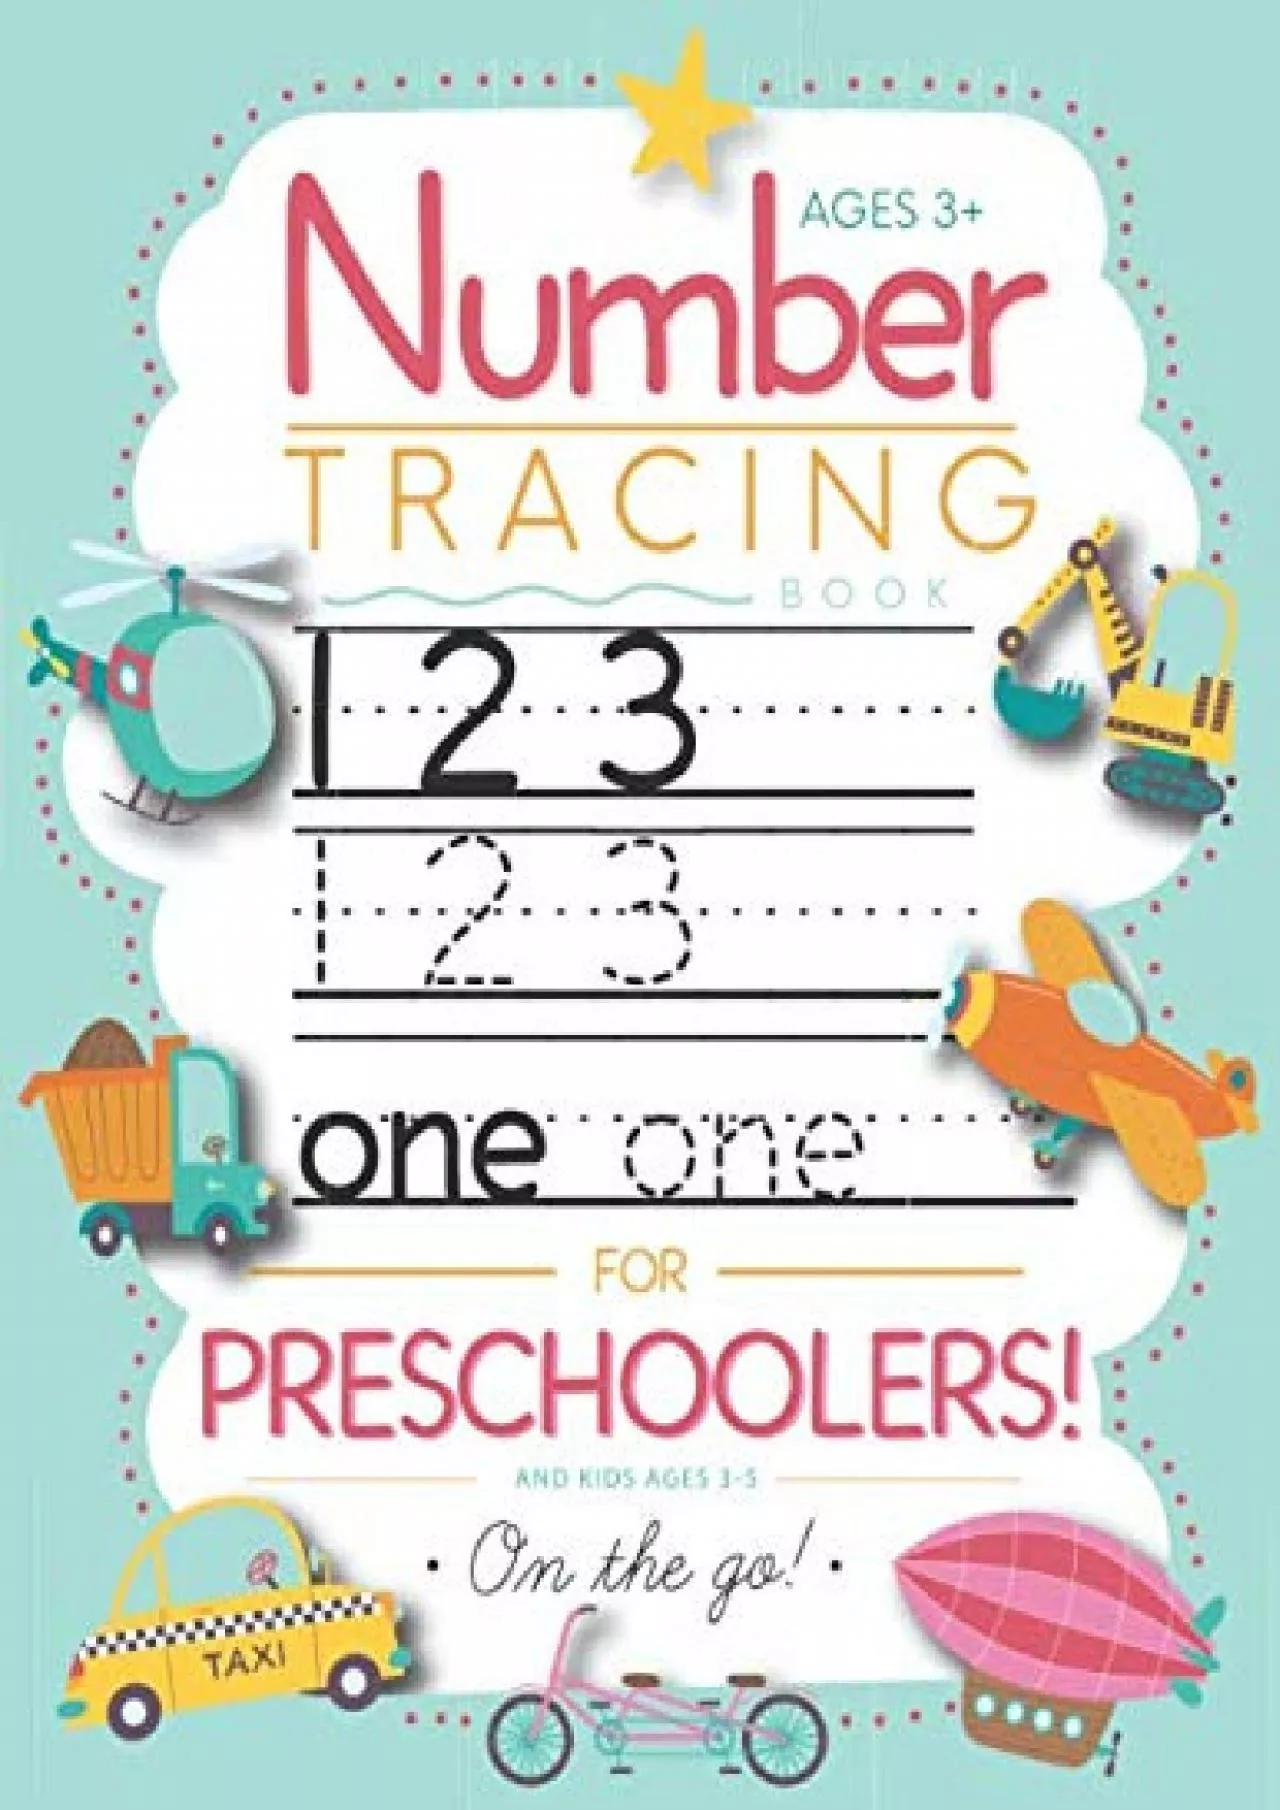 [READ] Number Tracing Book for Preschoolers and Kids Ages 3-5: Trace Numbers Practice